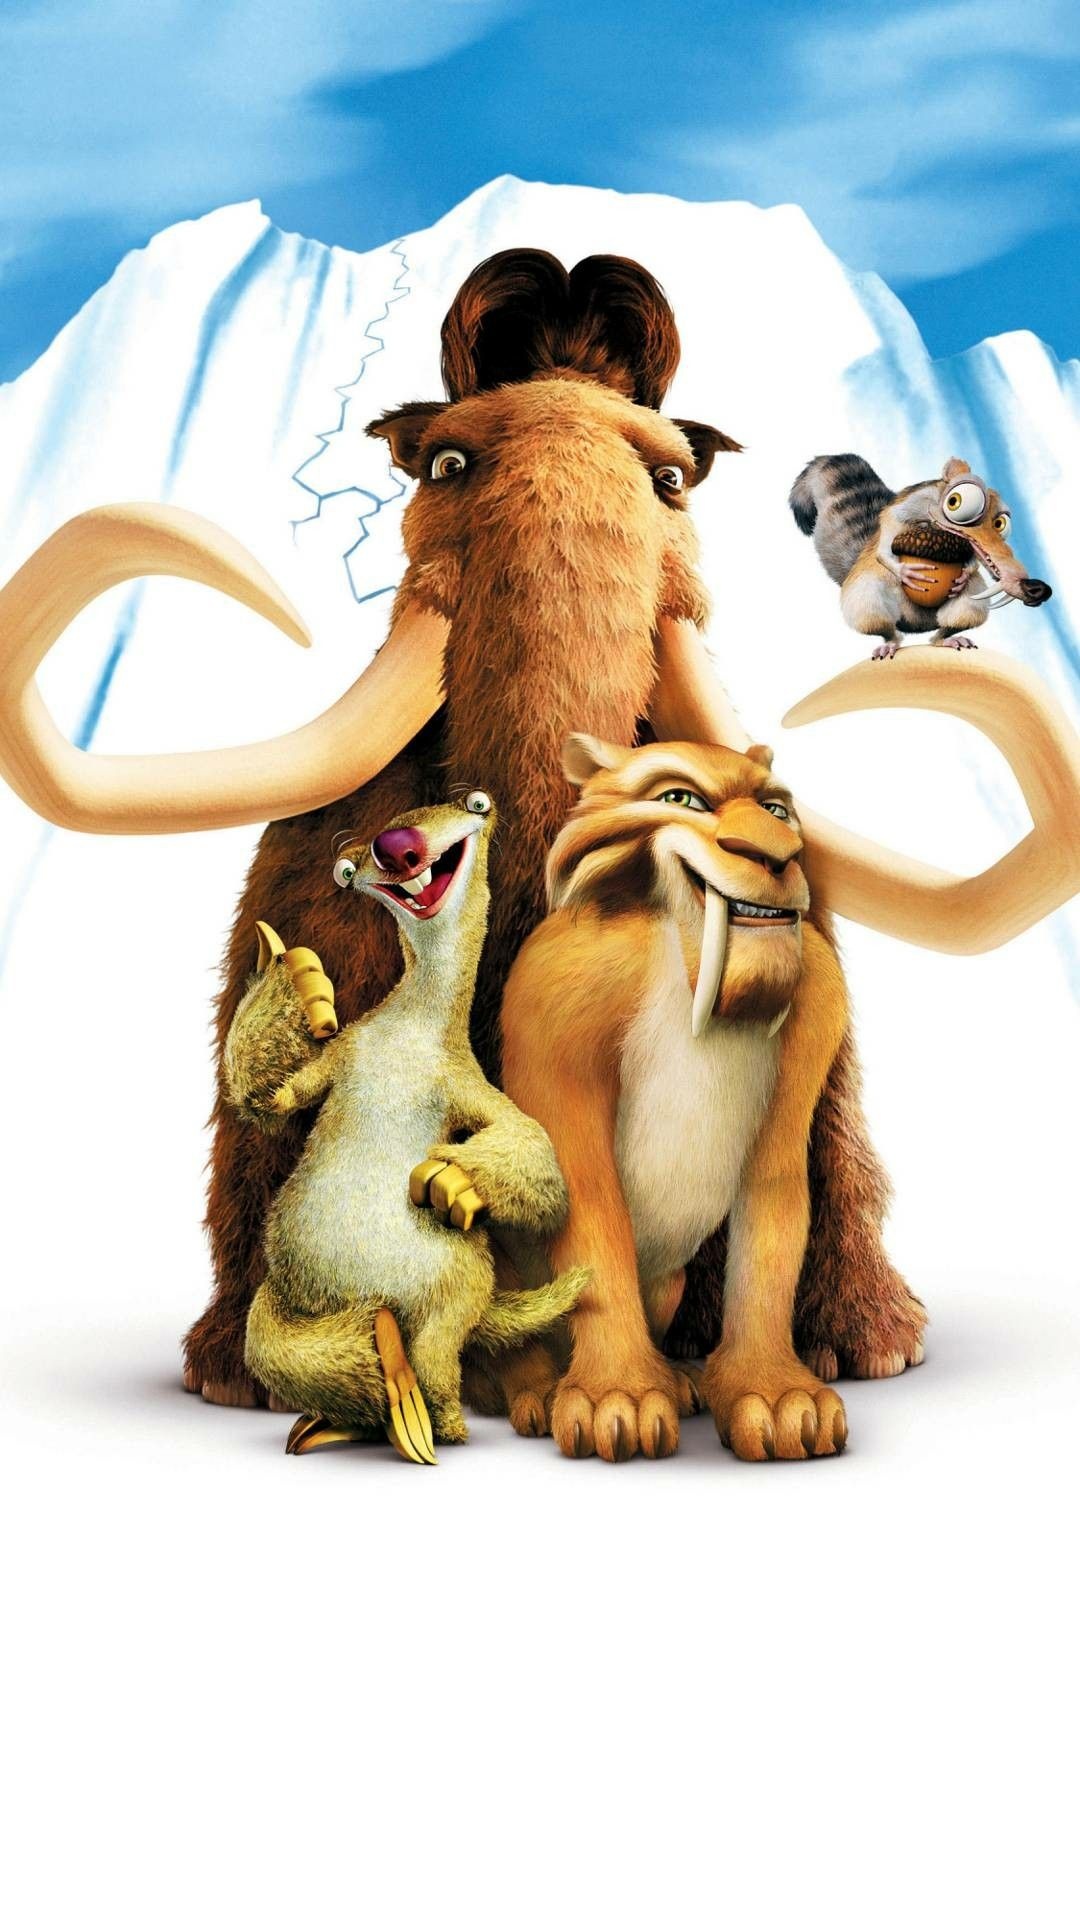 Ice Age franchise, Beloved characters, Ice Age movie wallpaper, Fan-favorite Scrat, 1080x1920 Full HD Phone